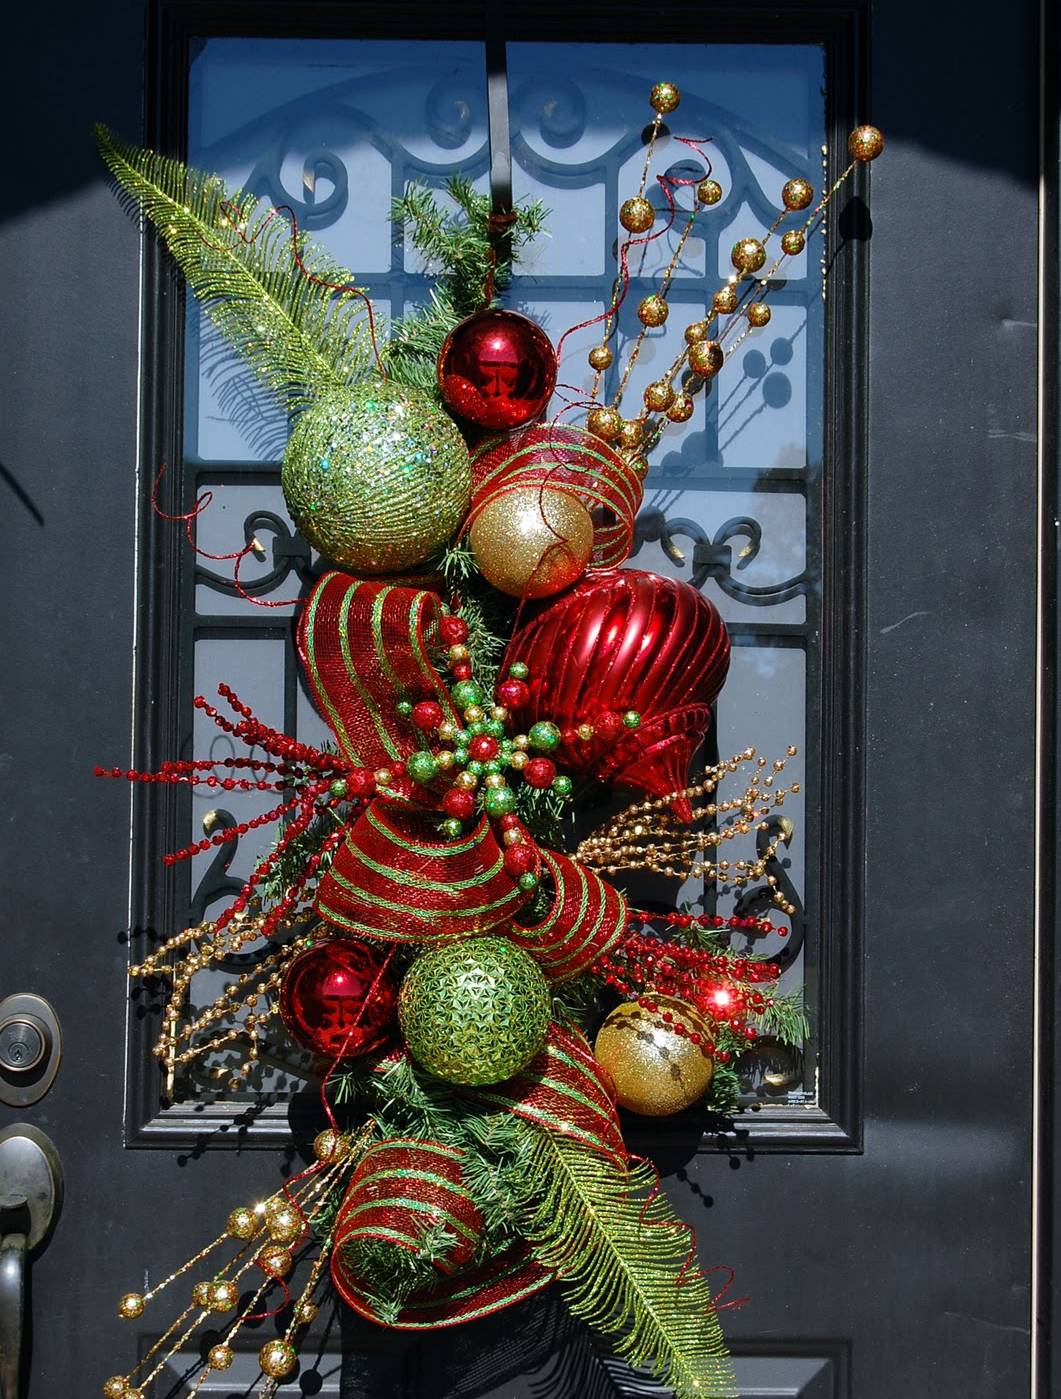 40 Christmas Door Decorations Ideas You Can Copy - Decoration Love